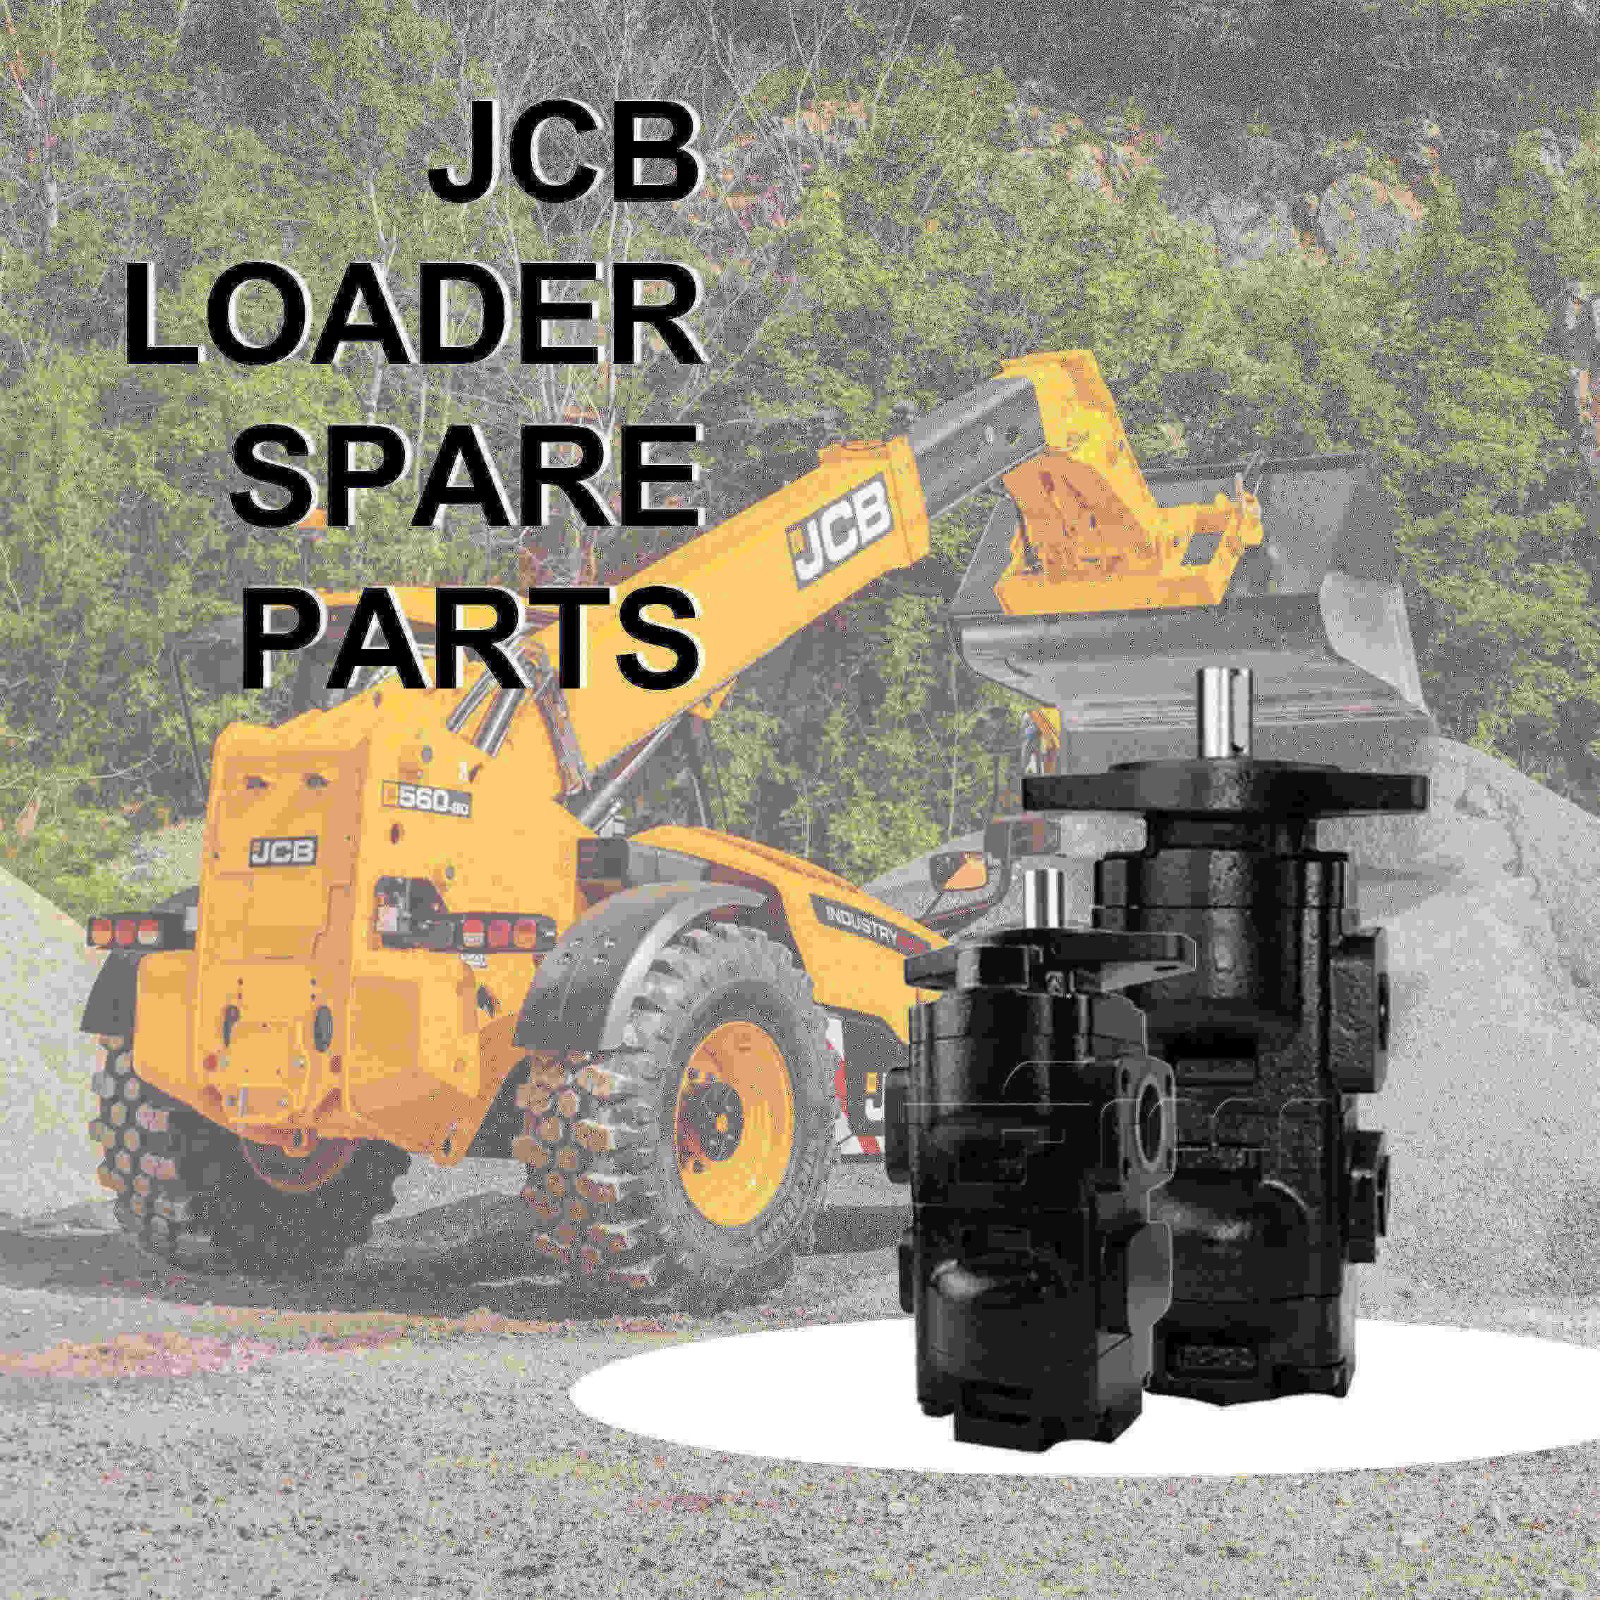 Applied to JCB construction machinery